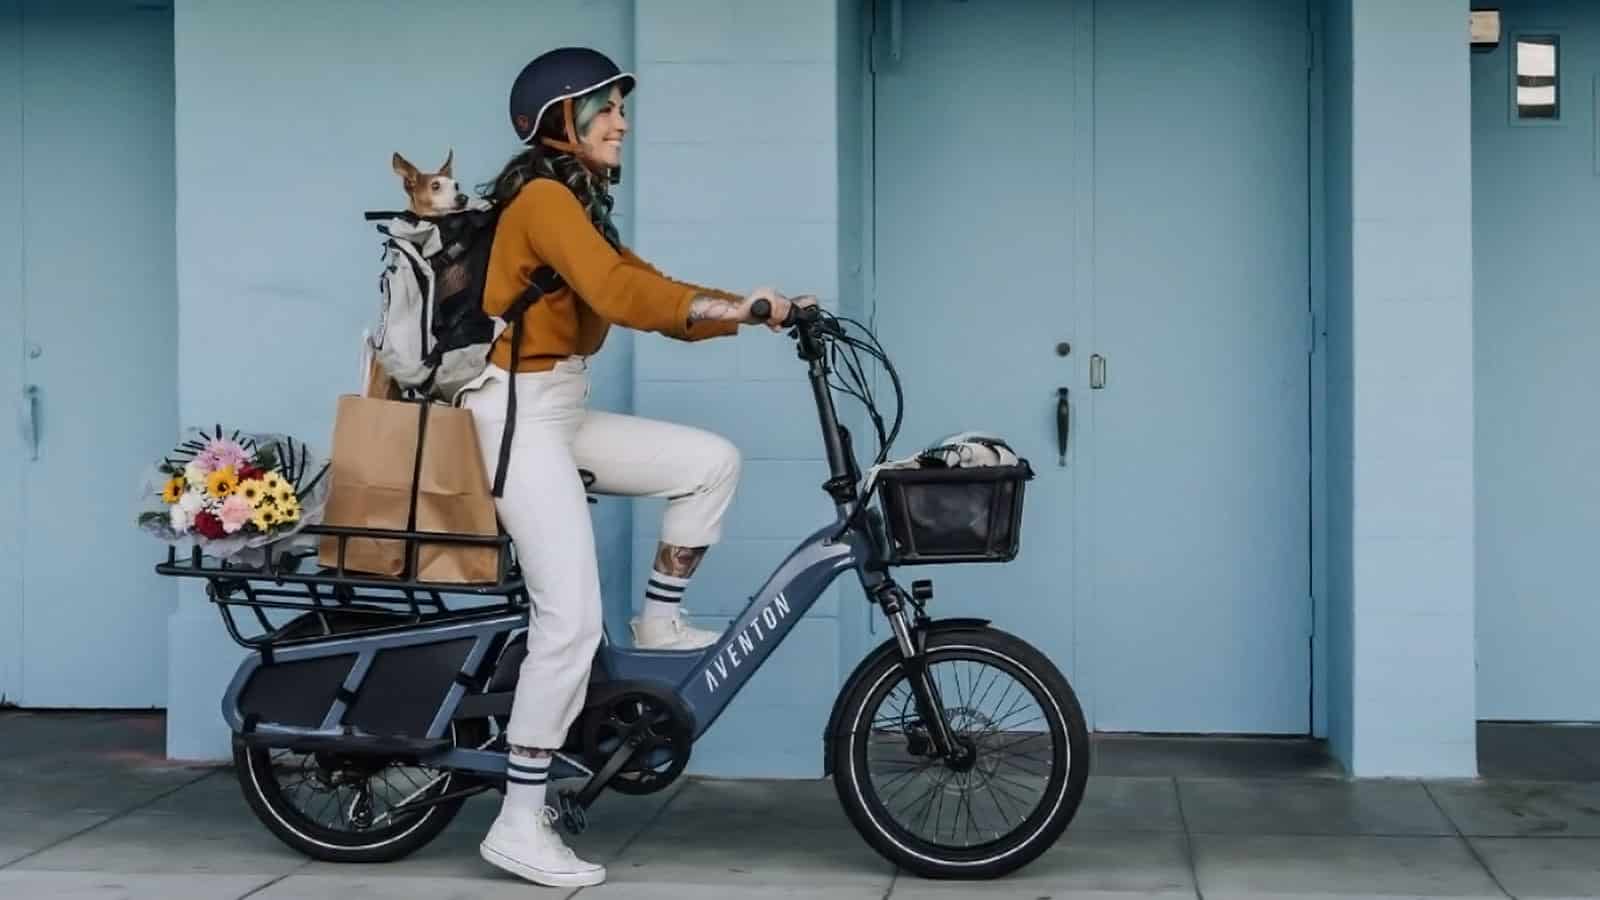 Aventon Abound shows cargo ability with woman riding with dog